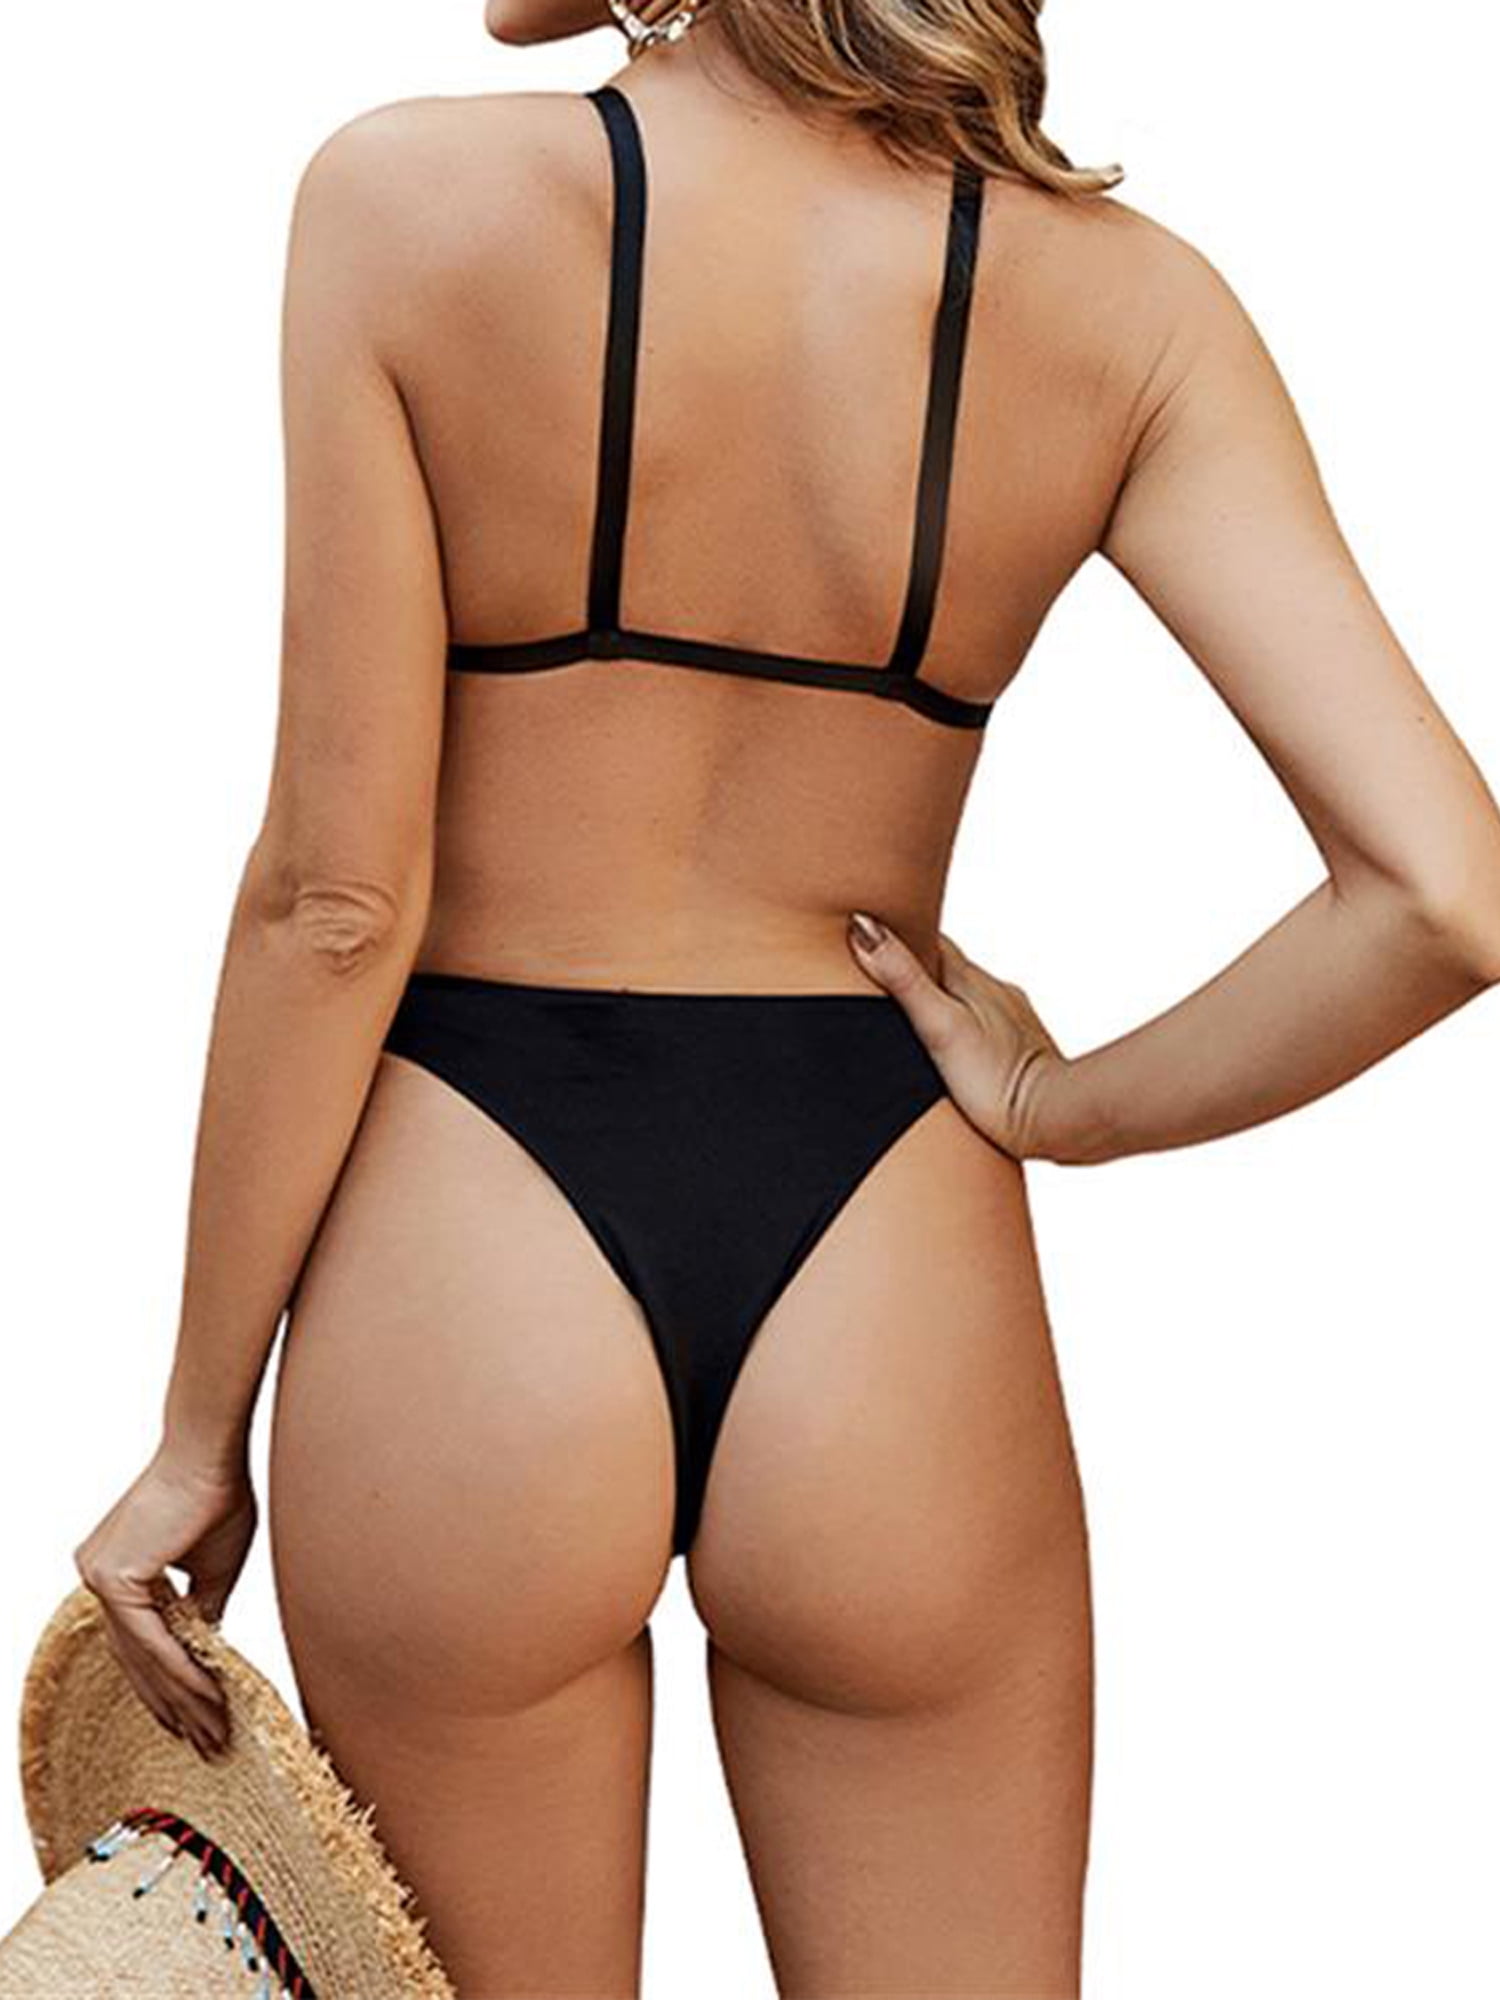 Stylish Low Waisted Bikini Air Bra & Panties Set Back For Women 32 Sizes  Available Sexy Sports Lace Design Brief Set Back With Thongbackless Action  Wxxx Sexy Lingerie From Bikini_designer, $14.8